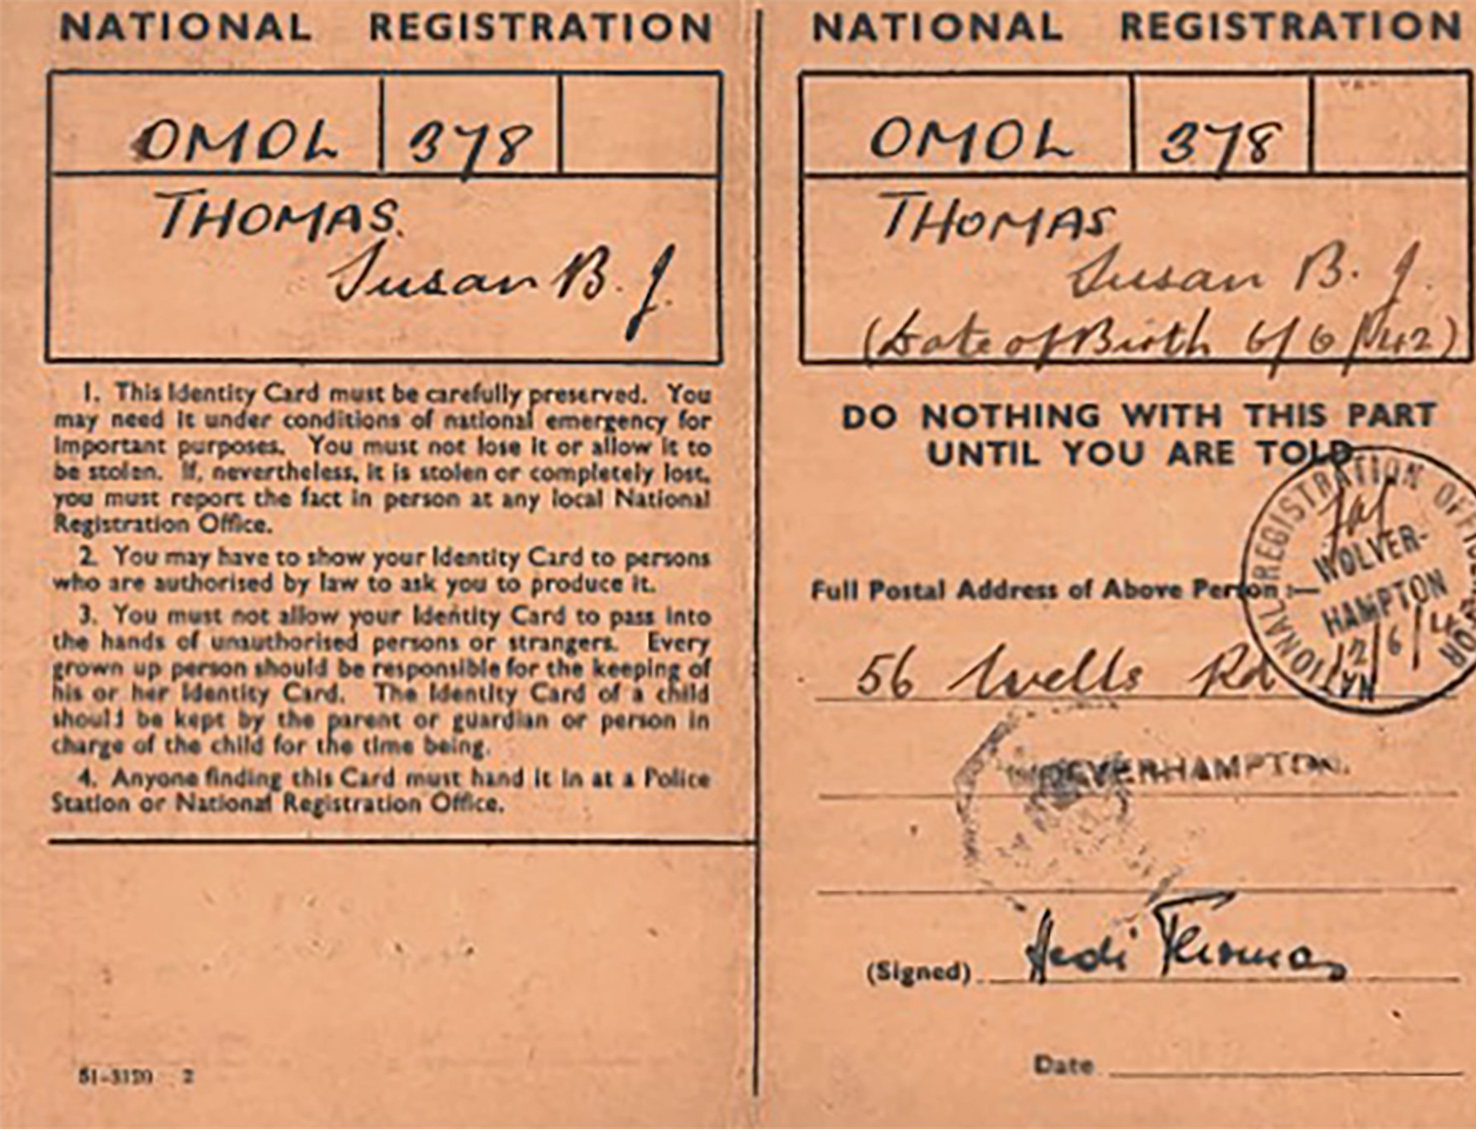 My National Registration card, dated 12/6/42